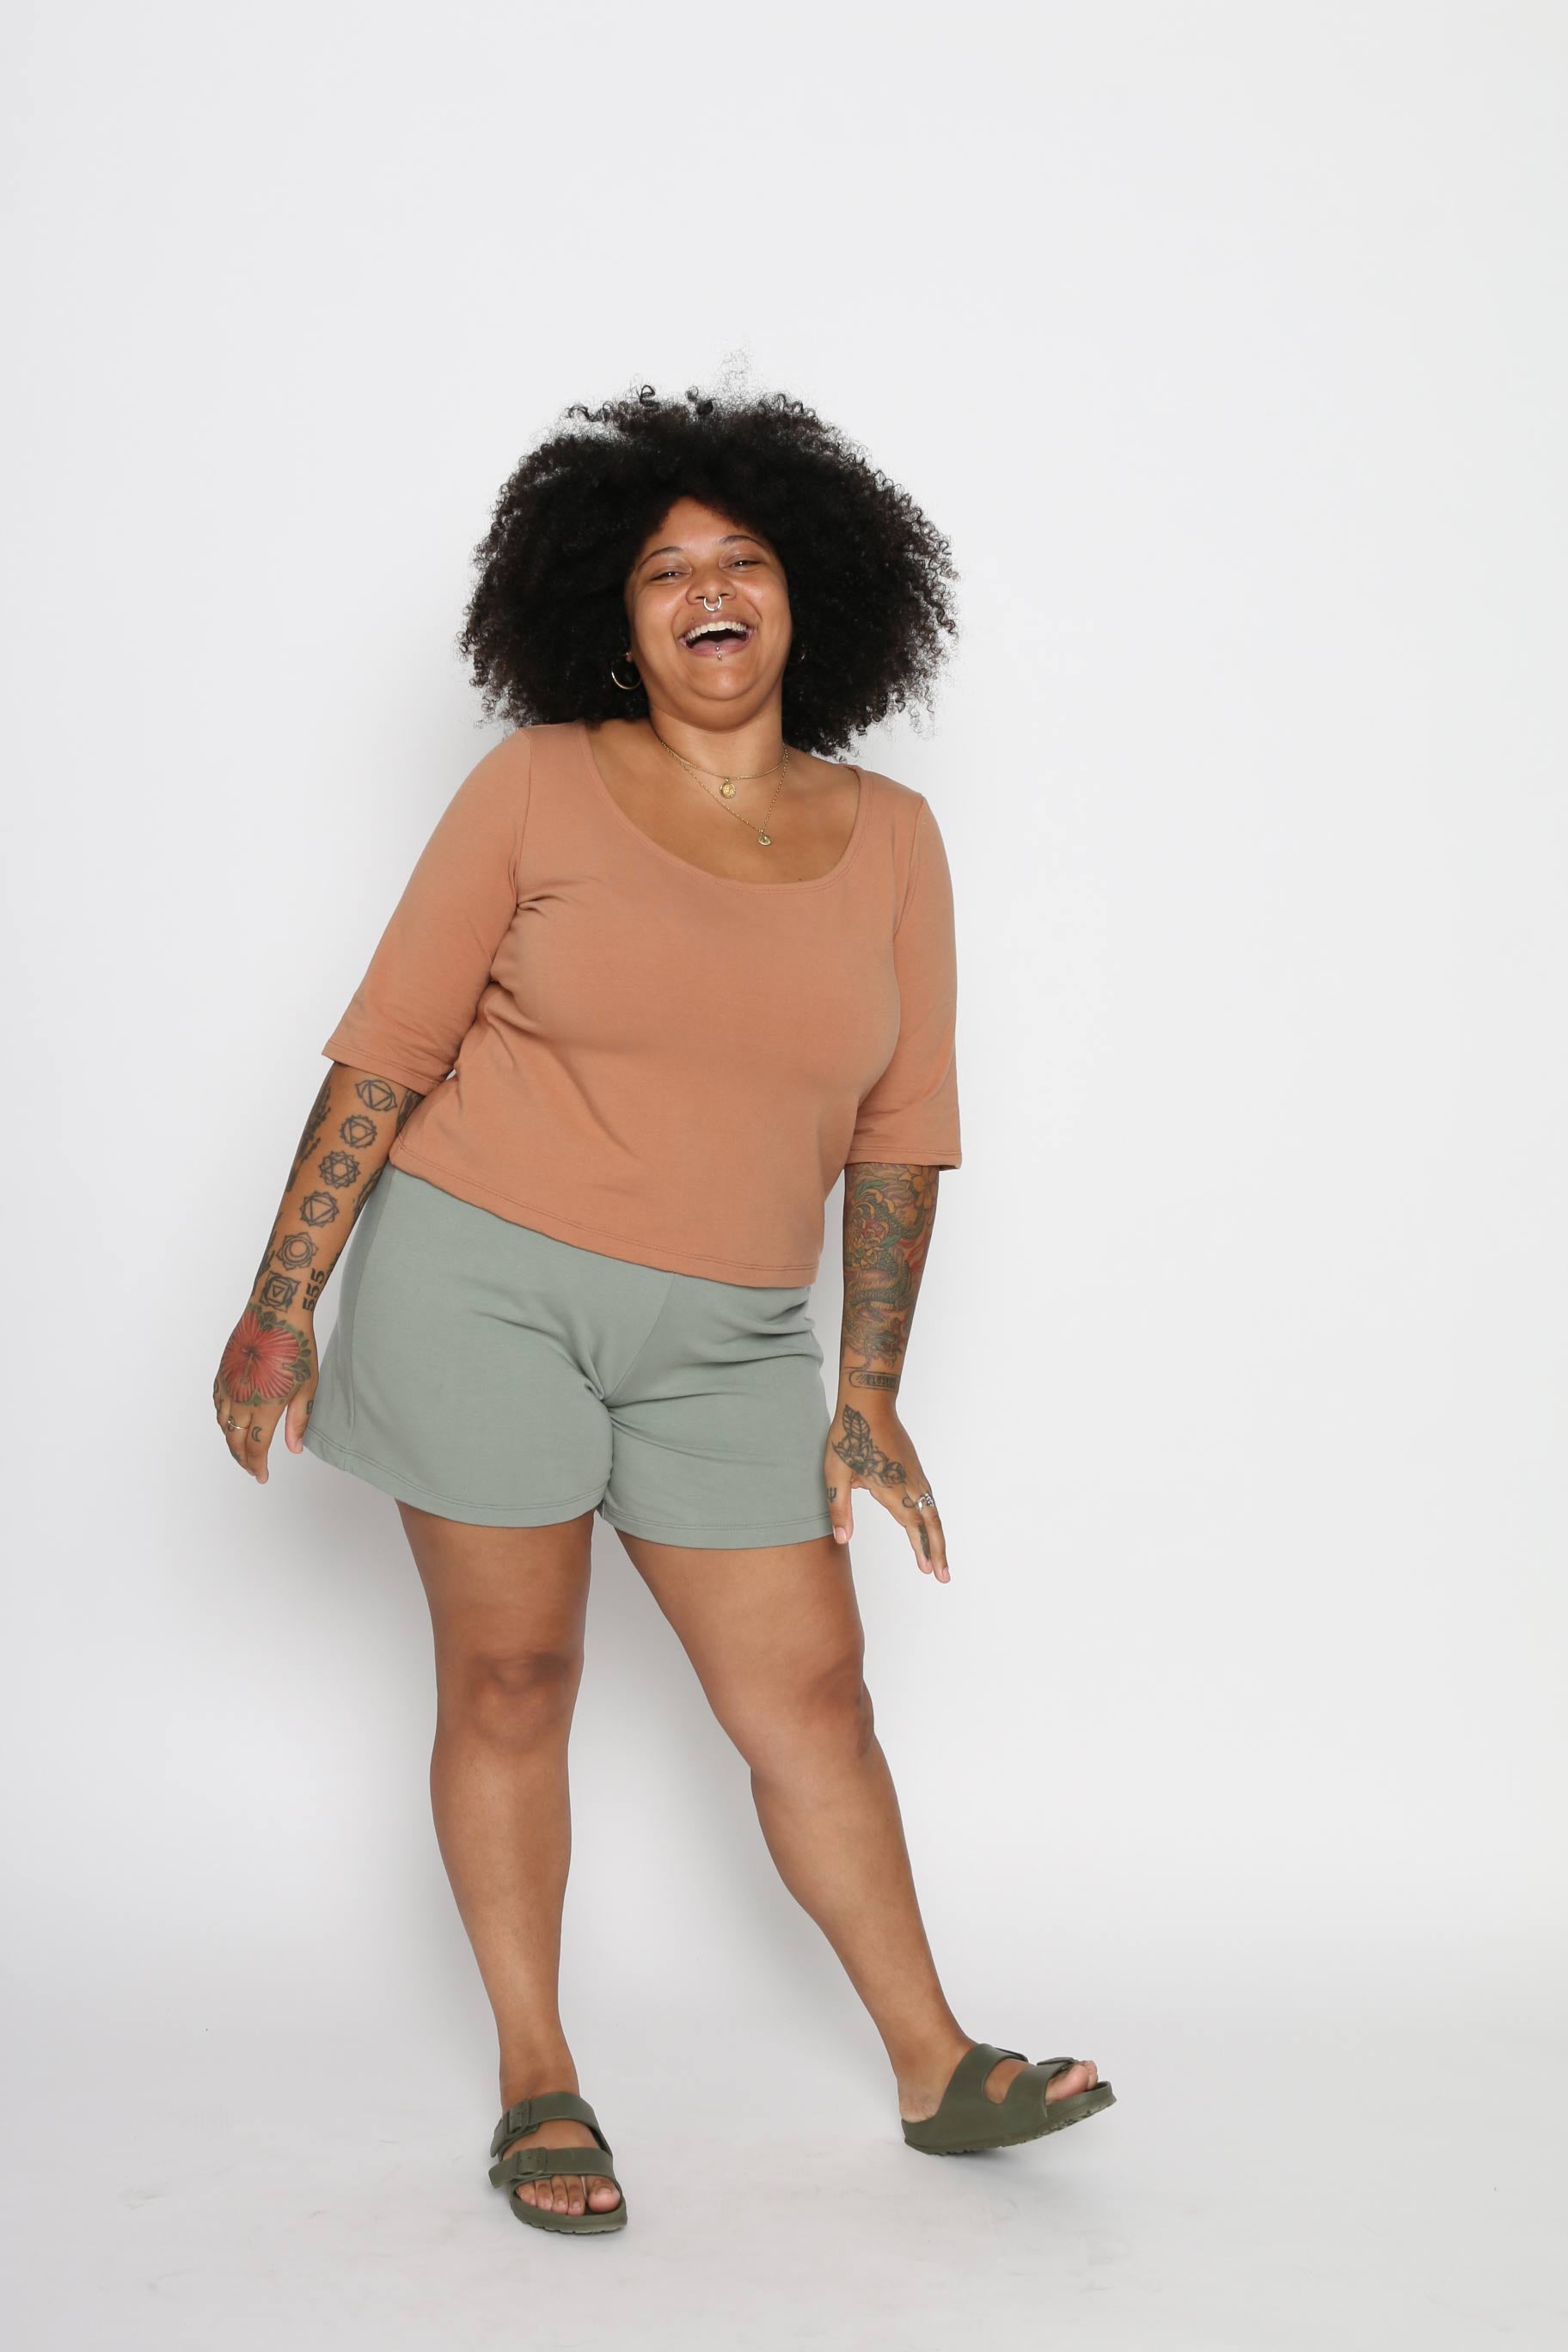 Ayanna is wearing a size XXL top and XL bottom. Her measurements are: Height 5&#39;3&quot; | Bust 49&quot; | Waist 39&quot; | Hip 50&quot;